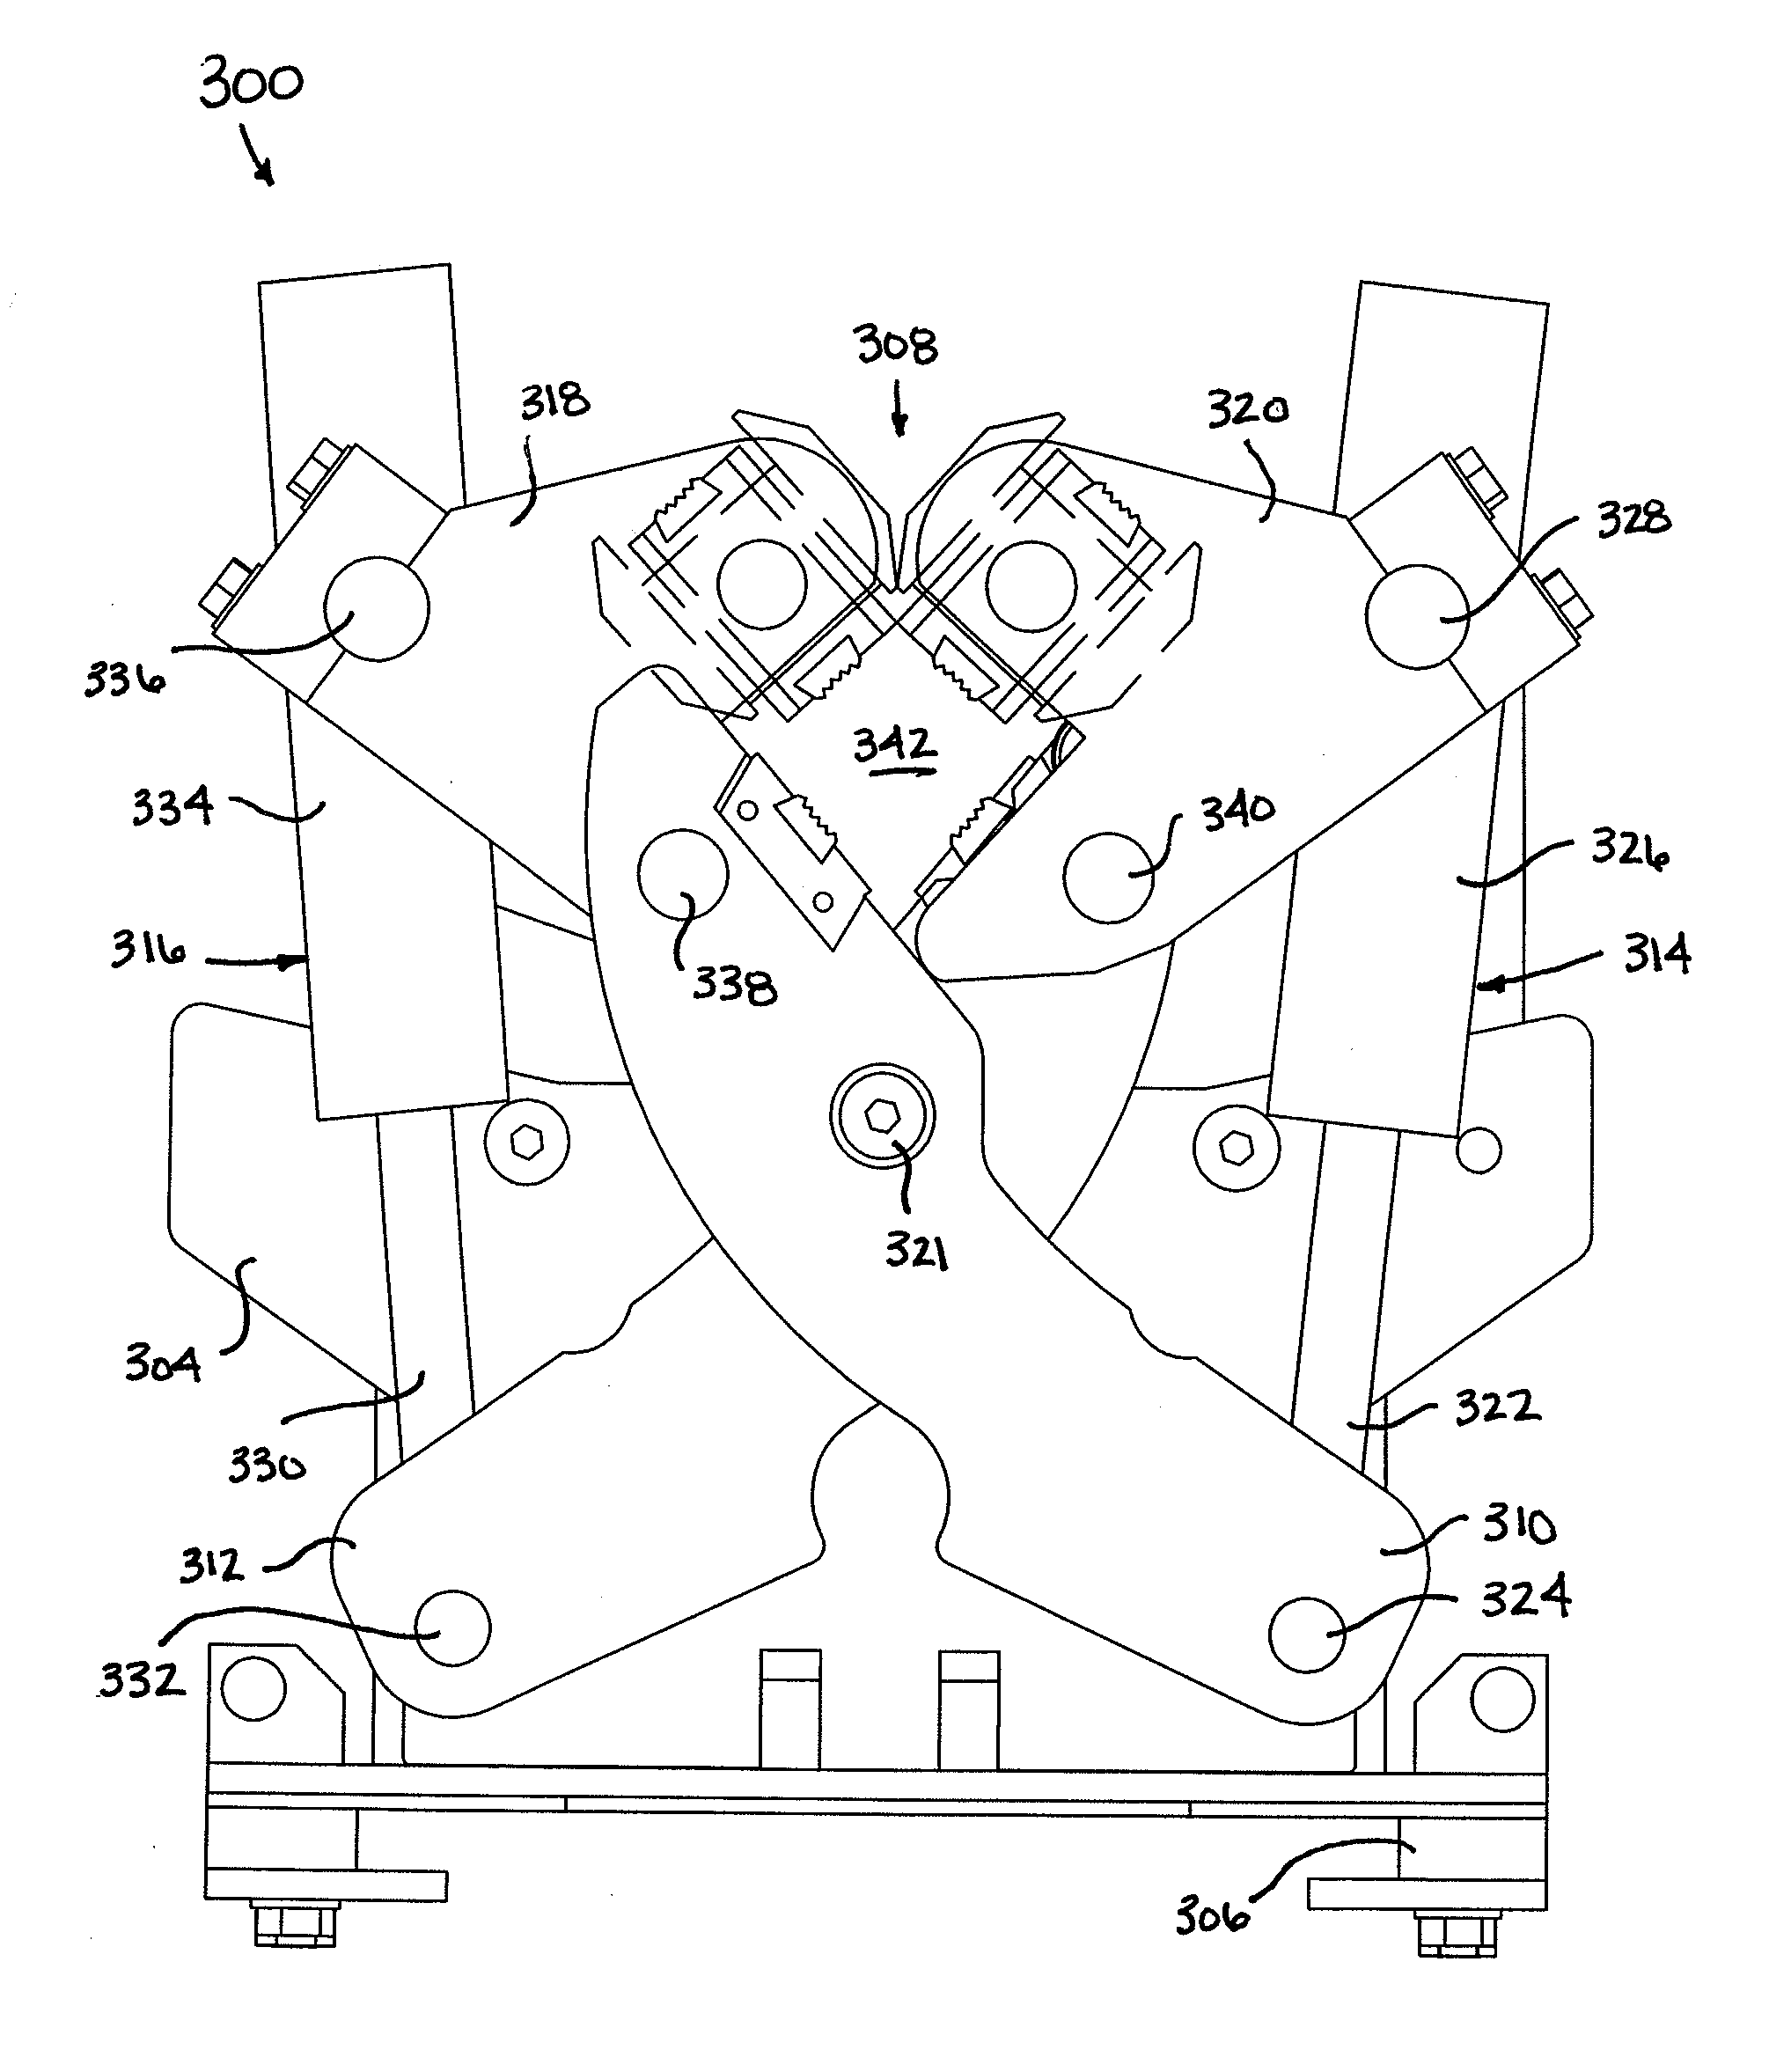 Vise for a directional drilling machine